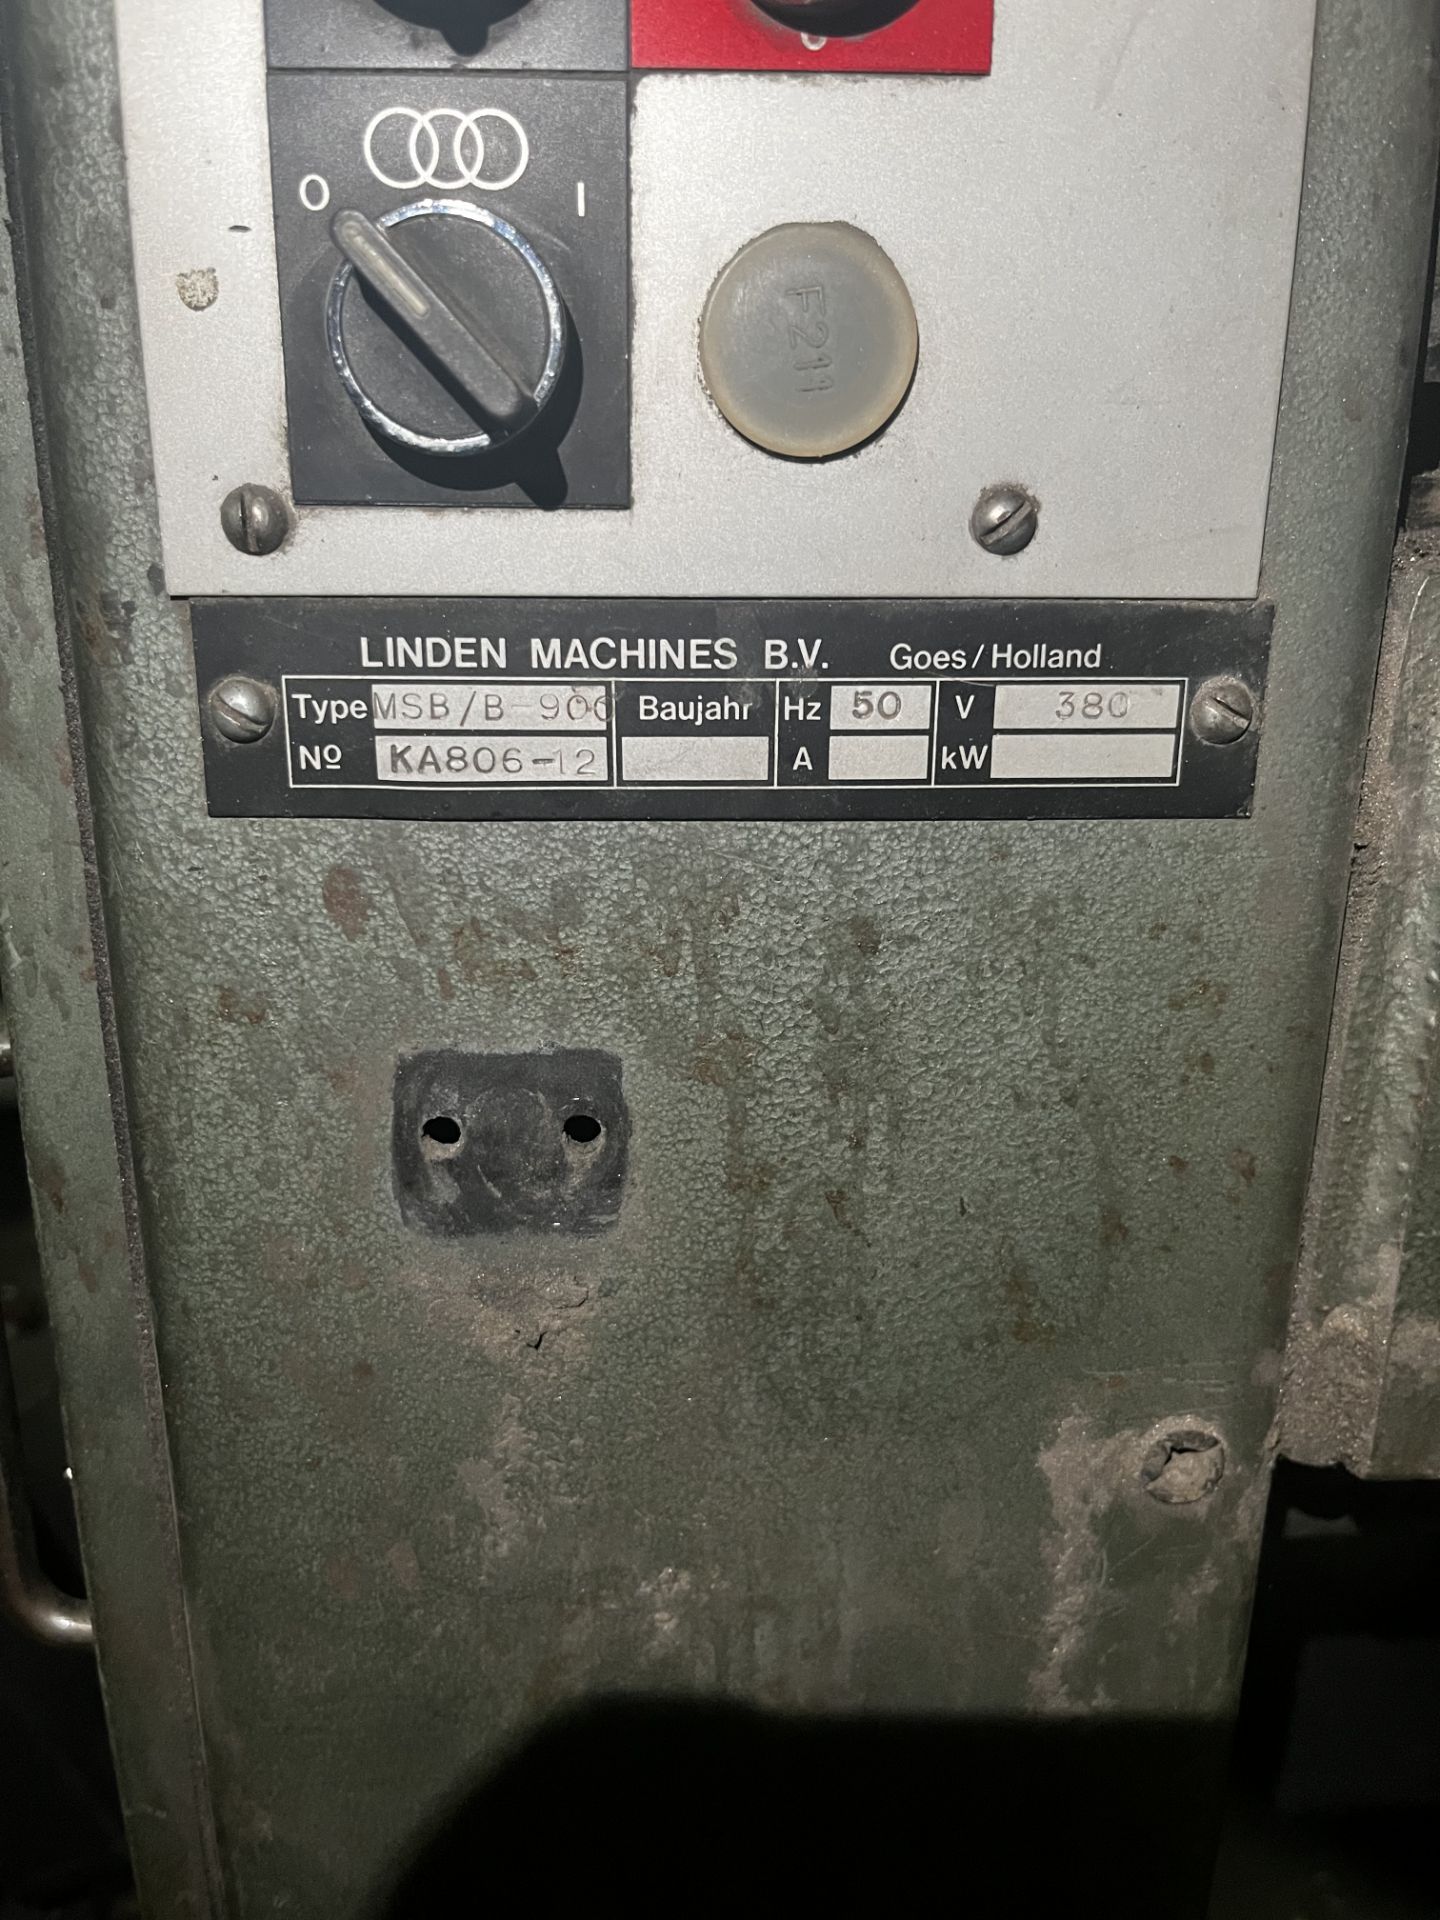 Grinding Master Type MSB/B900, No. KA806-12 Belt Sander Machine (To Be Collected c.12 noon on - Image 2 of 2